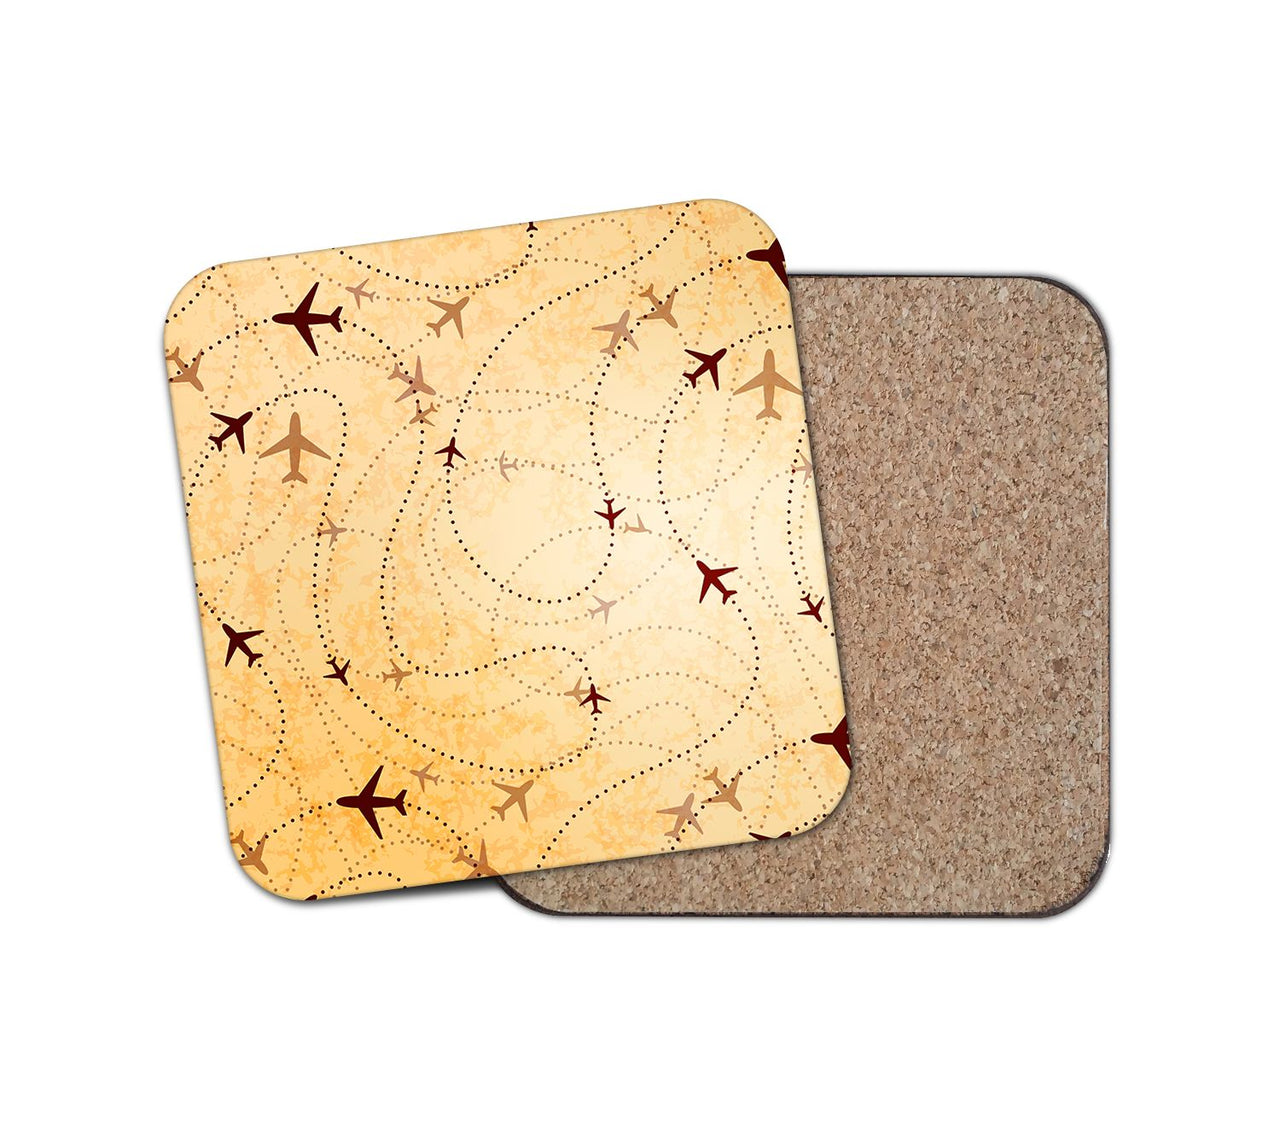 Vintage Travelling with Aircraft Designed Coasters